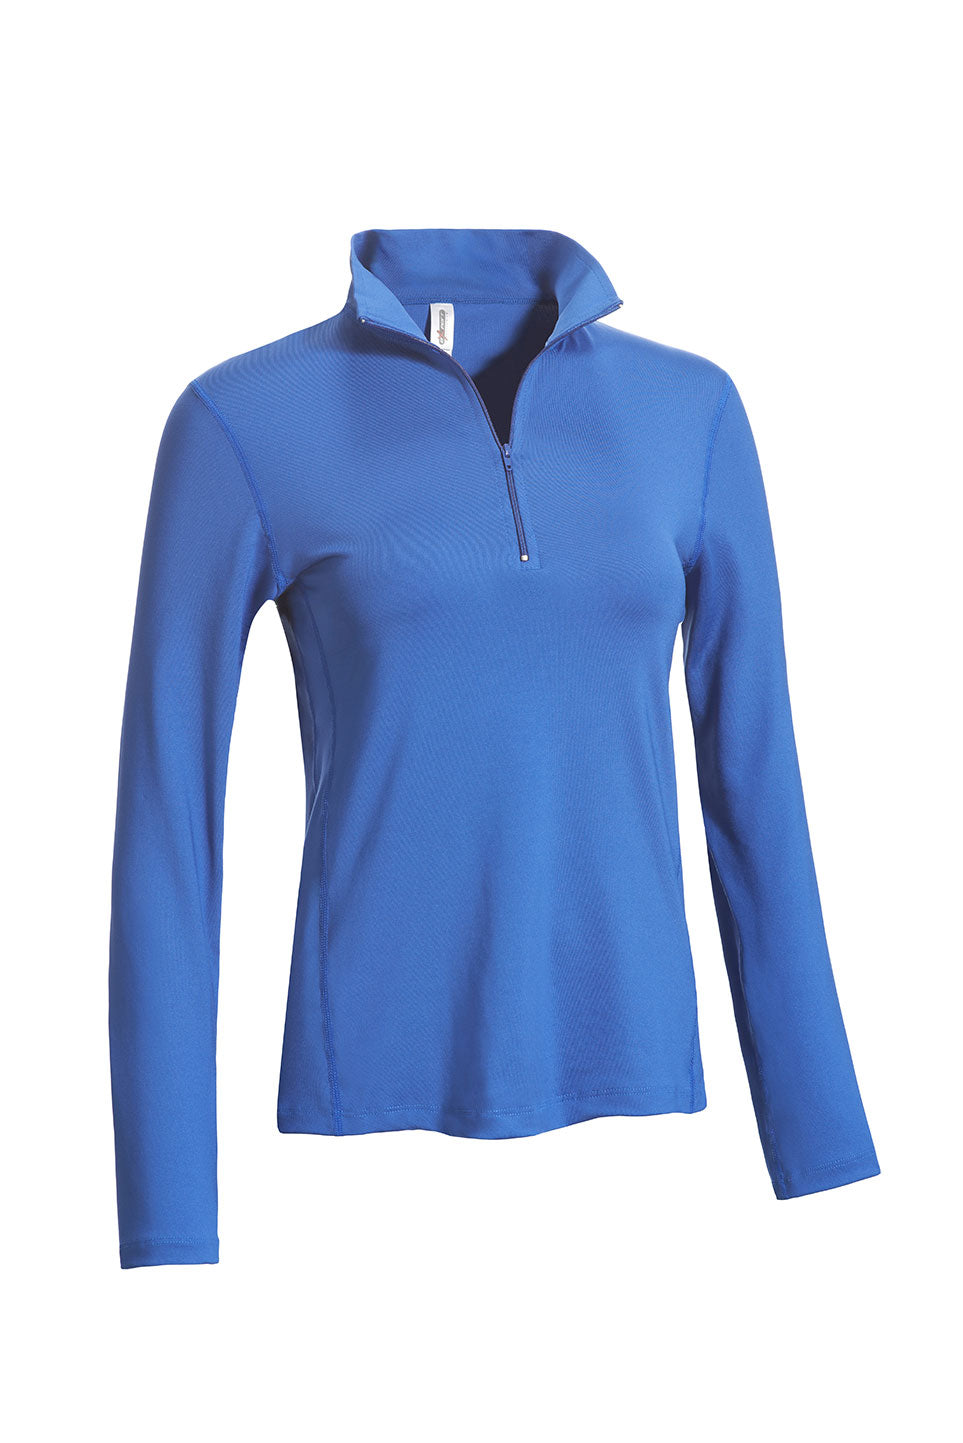 Expert Brand Wholesale Made in USA Women's Quarter Zip Tracksuit Pullover Top in Cadet Blue#cadet-blue